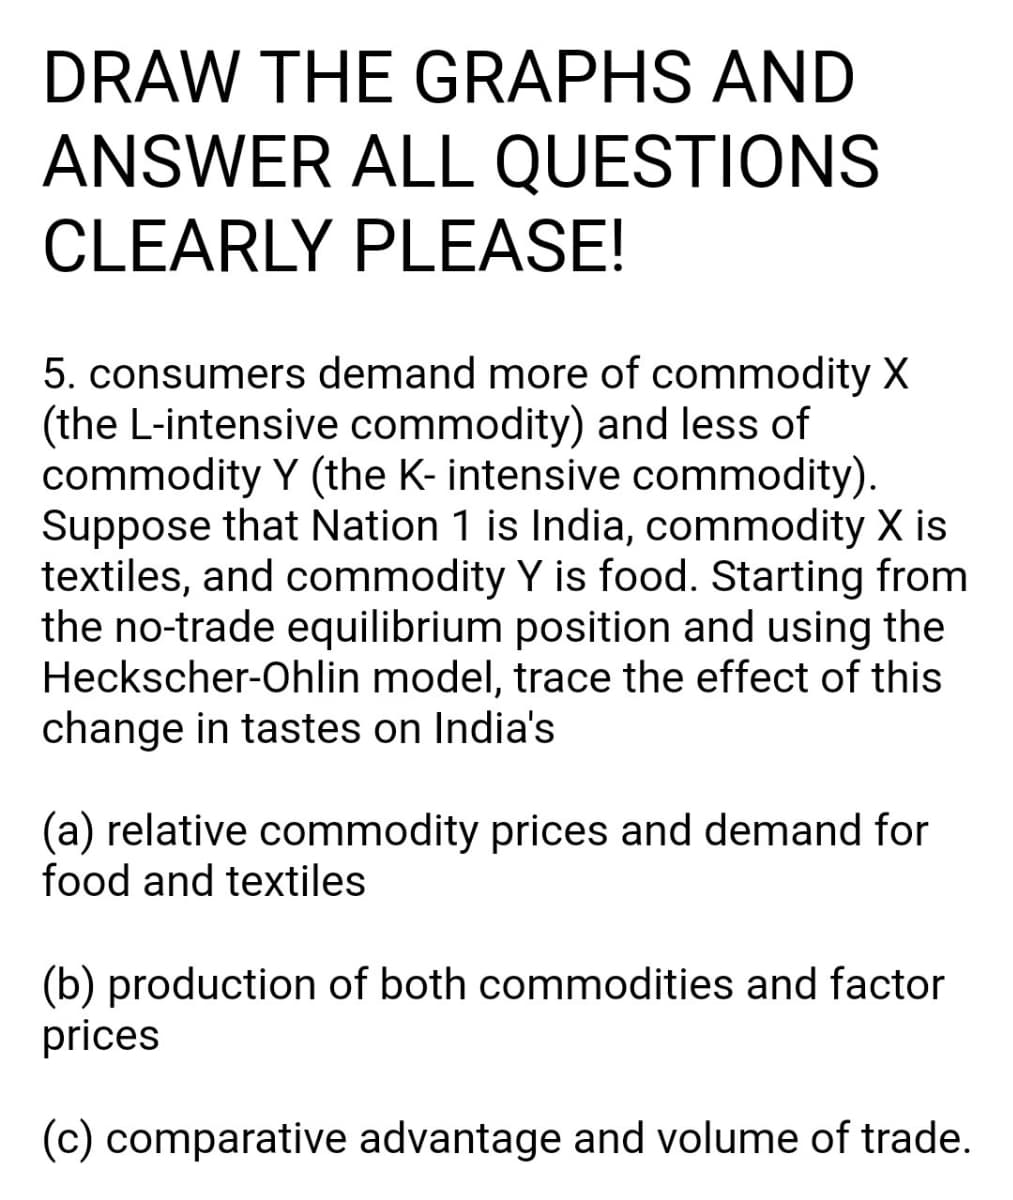 DRAW THE GRAPHS AND
ANSWER ALL QUESTIONS
CLEARLY PLEASE!
5. consumers demand more of commodity X
(the L-intensive commodity) and less of
commodity Y (the K- intensive commodity).
Suppose that Nation 1 is India, commodity X is
textiles, and commodity Y is food. Starting from
the no-trade equilibrium position and using the
Heckscher-Ohlin model, trace the effect of this
change in tastes on India's
(a) relative commodity prices and demand for
food and textiles
(b) production of both commodities and factor
prices
(c) comparative advantage and volume of trade.
